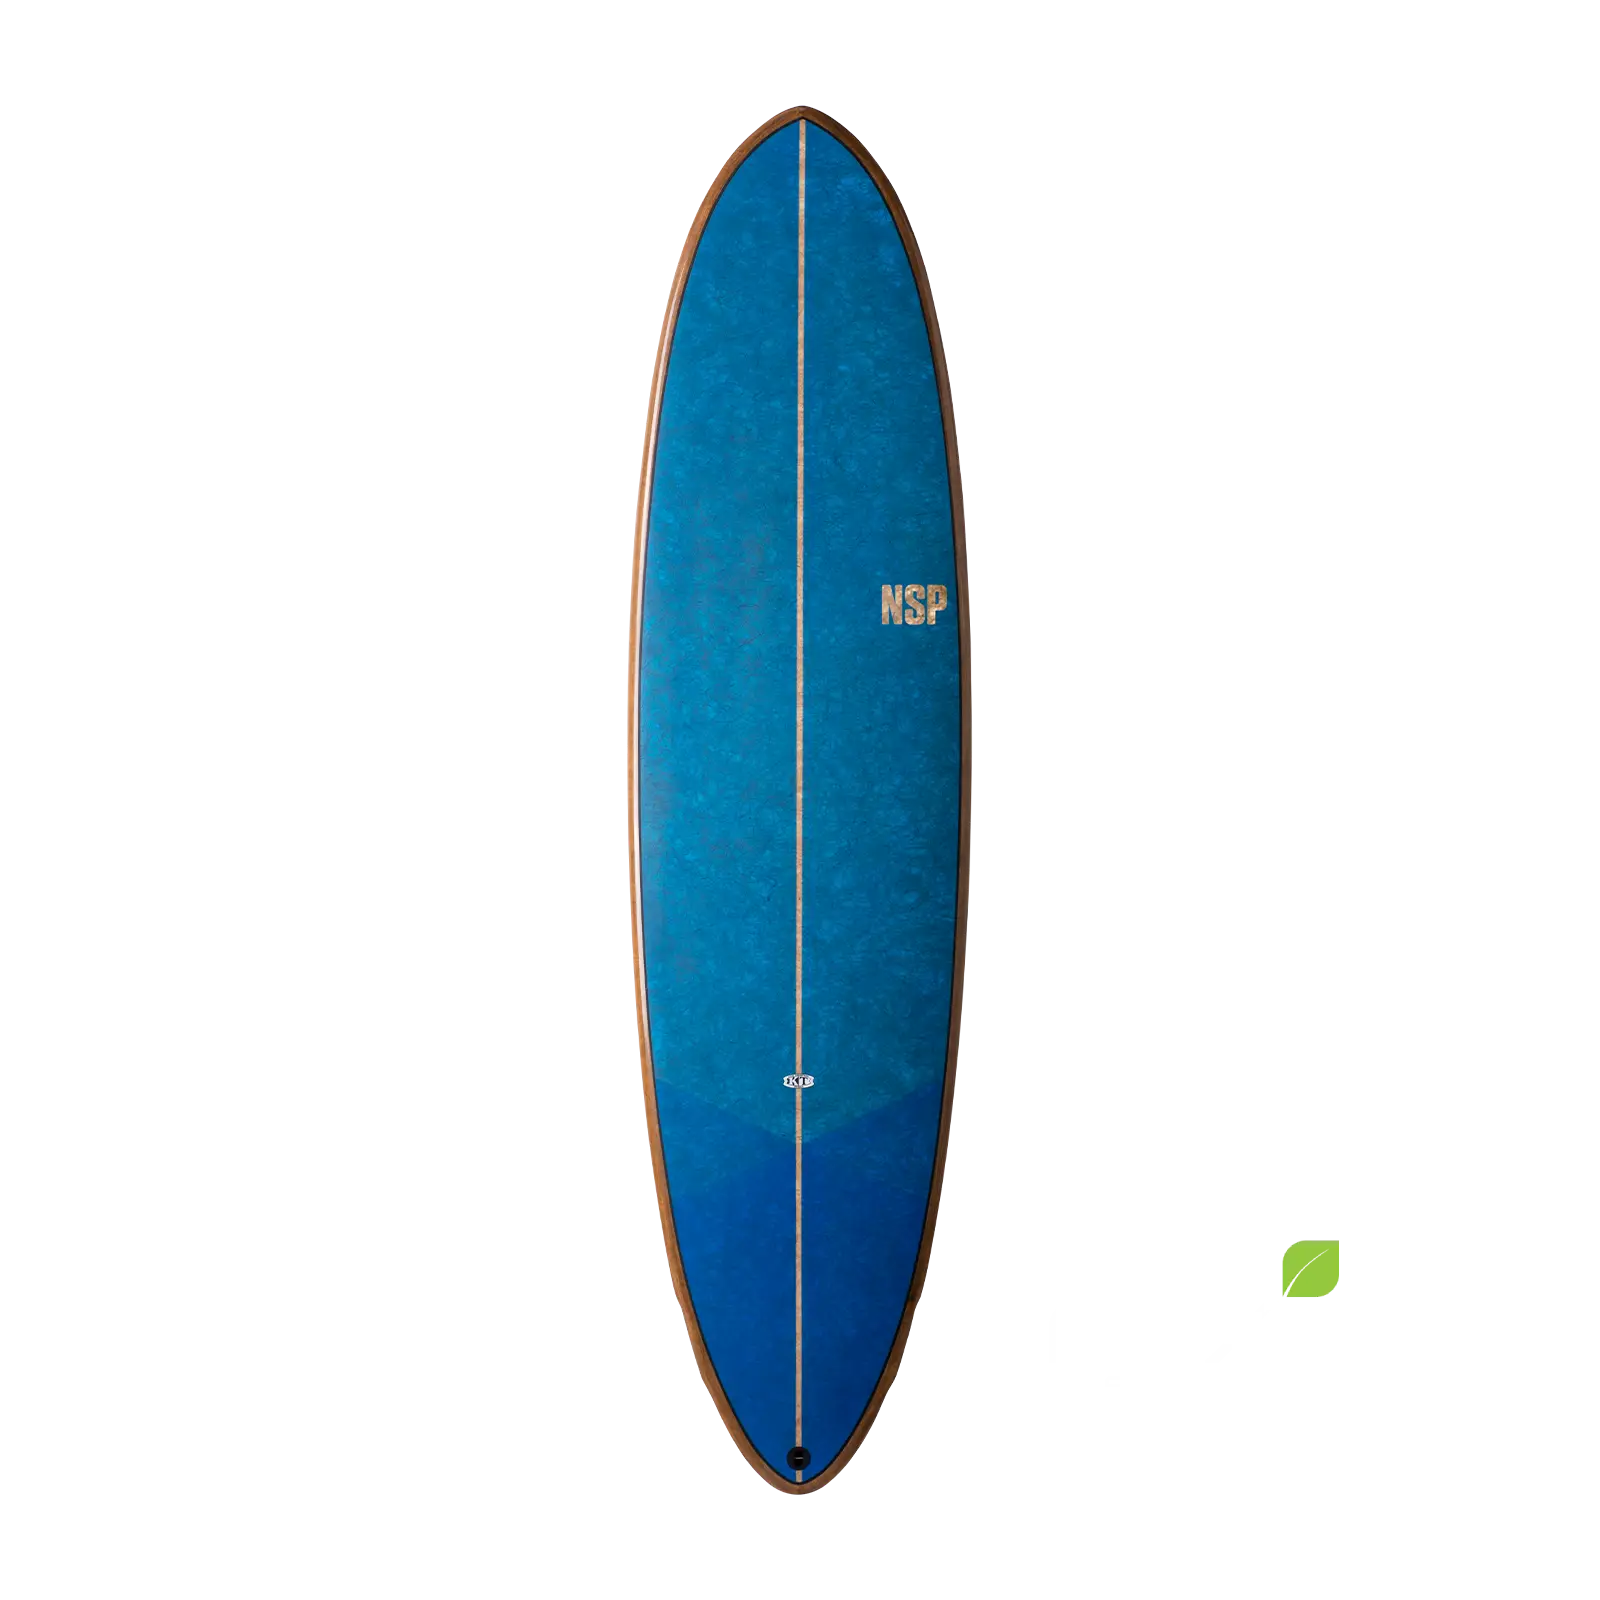 NSP Dream Rider CocoFlax 7'2" | 42.4 L Tail Dip Blue NSP Europe